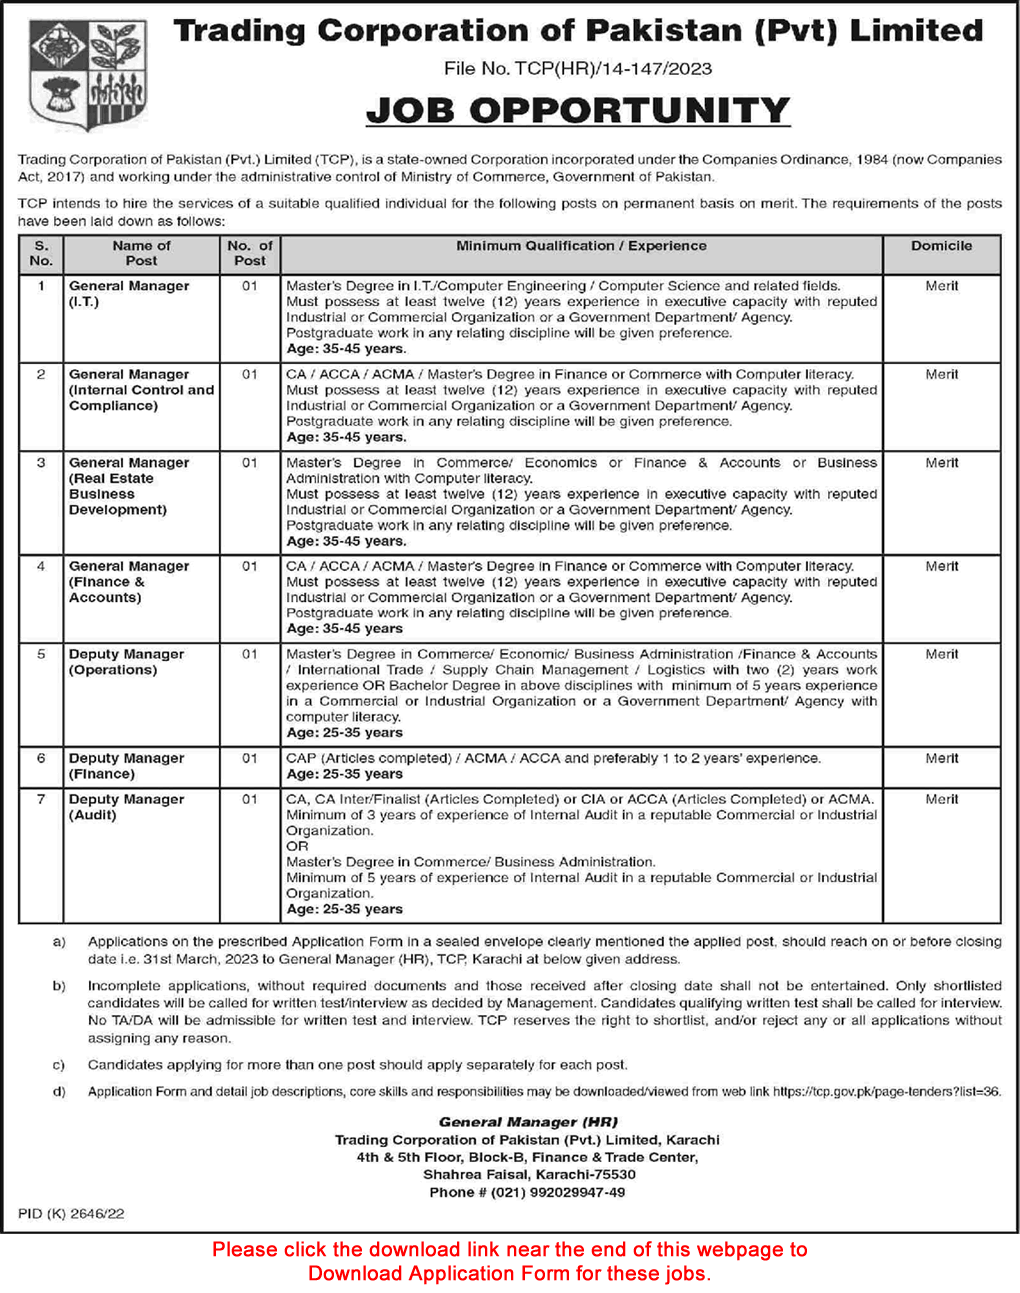 Trading Corporation of Pakistan Karachi Jobs 2023 March Application Form General / Deputy Managers Latest